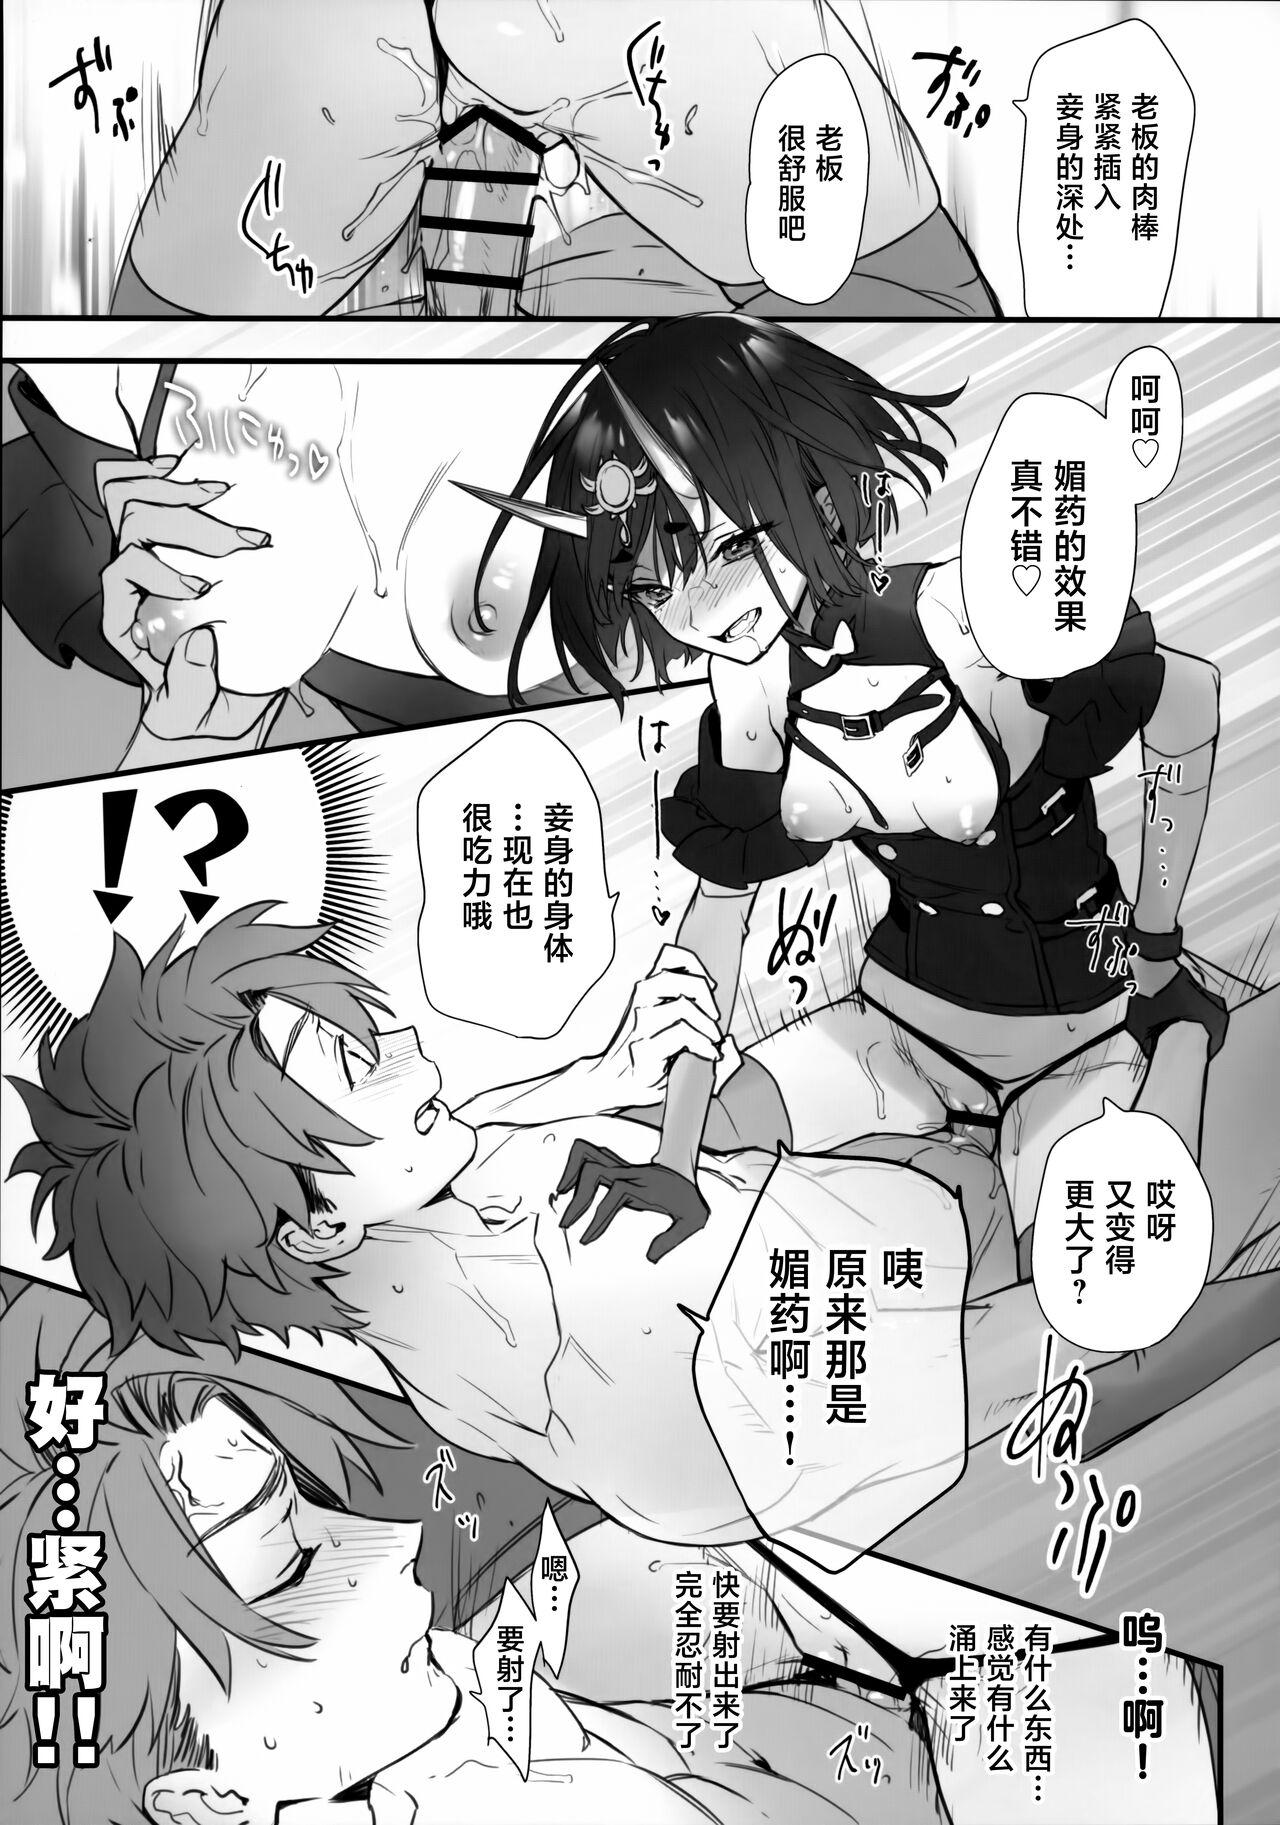 Spit Kimi wa Succubus - Fate grand order Yanks Featured - Page 9